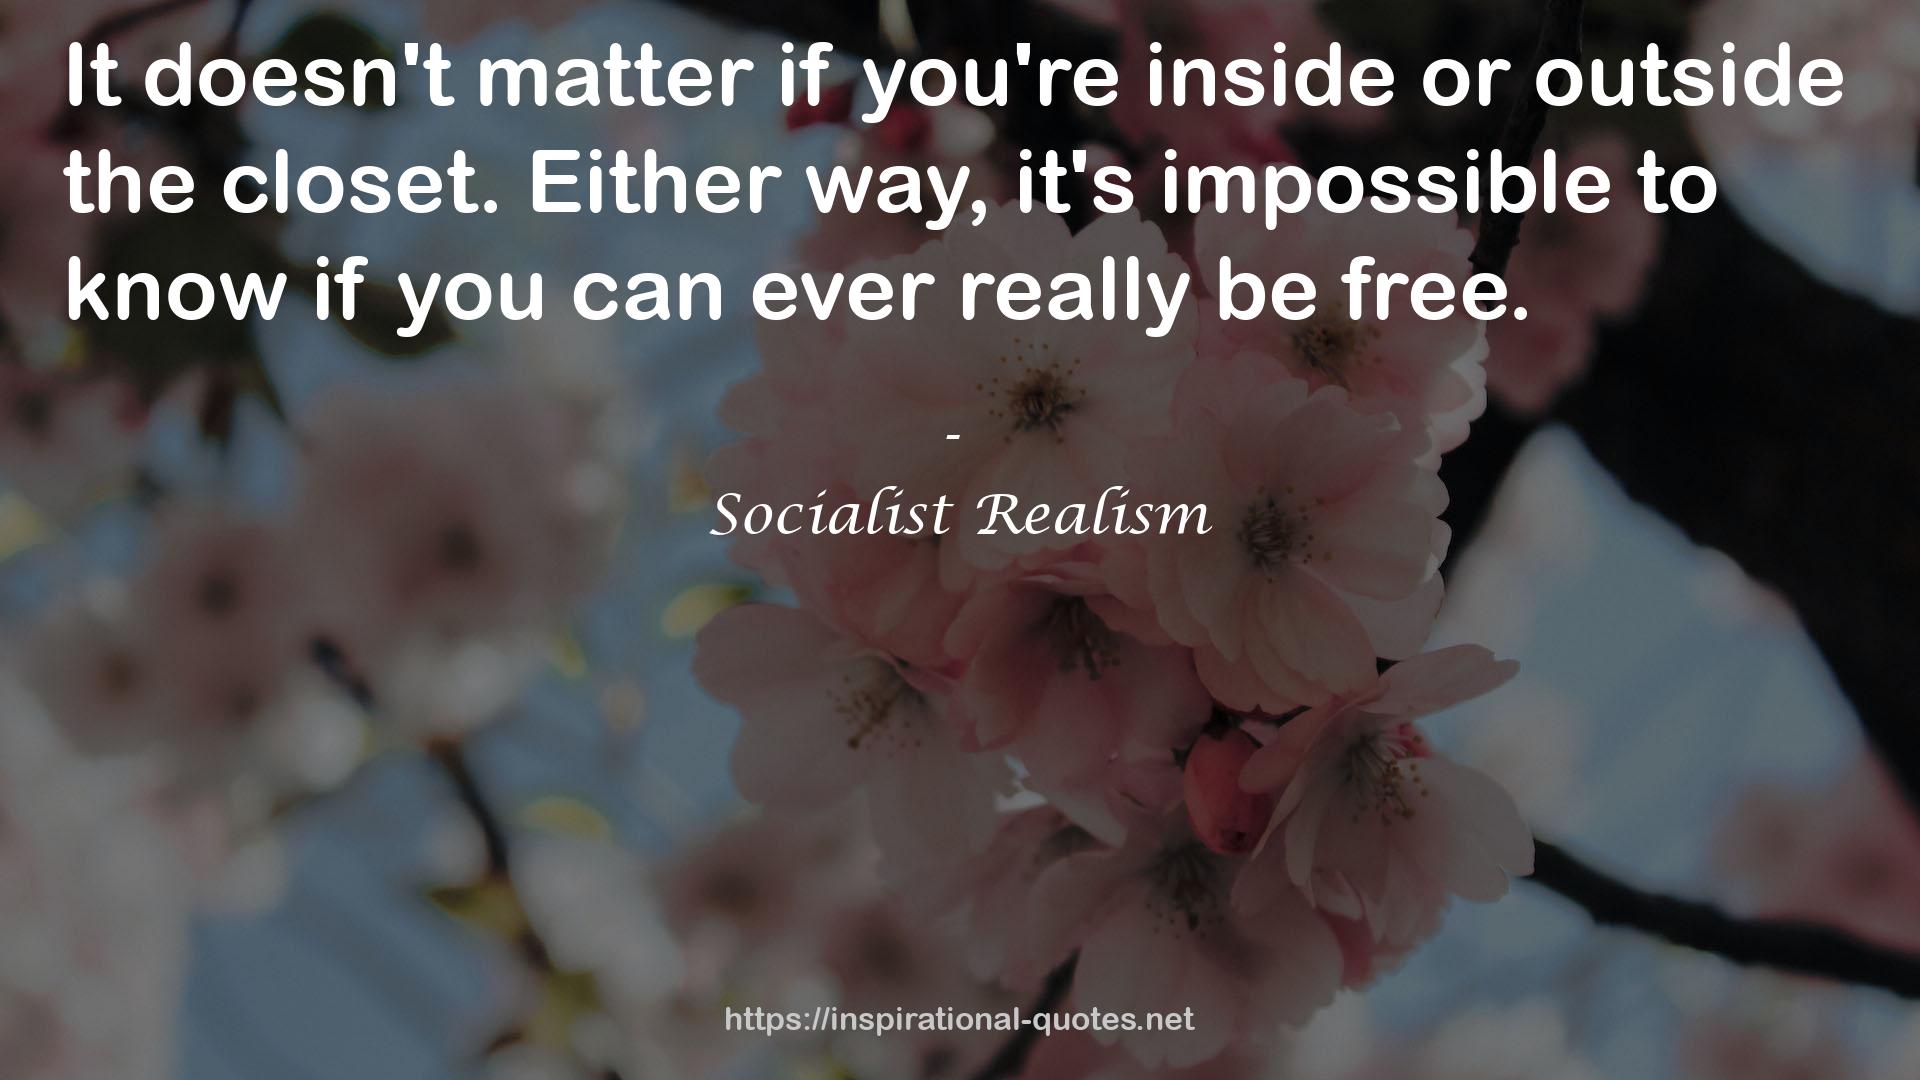 Socialist Realism QUOTES